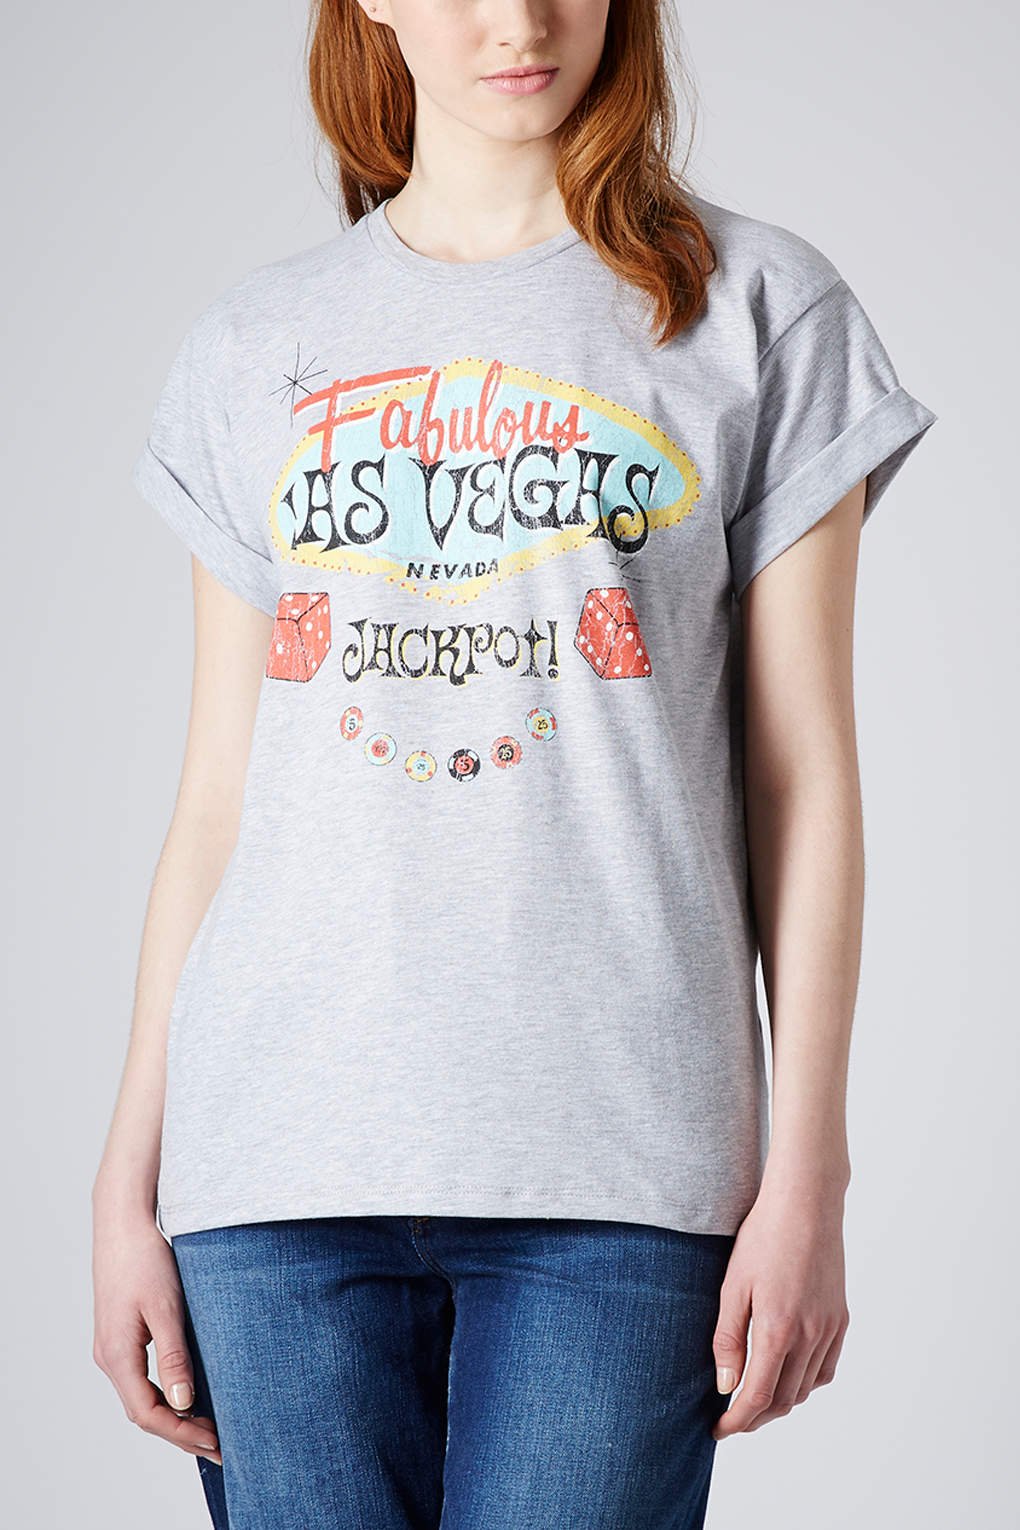 Lyst  Topshop Las Vegas Tee By Tee And Cake in Gray